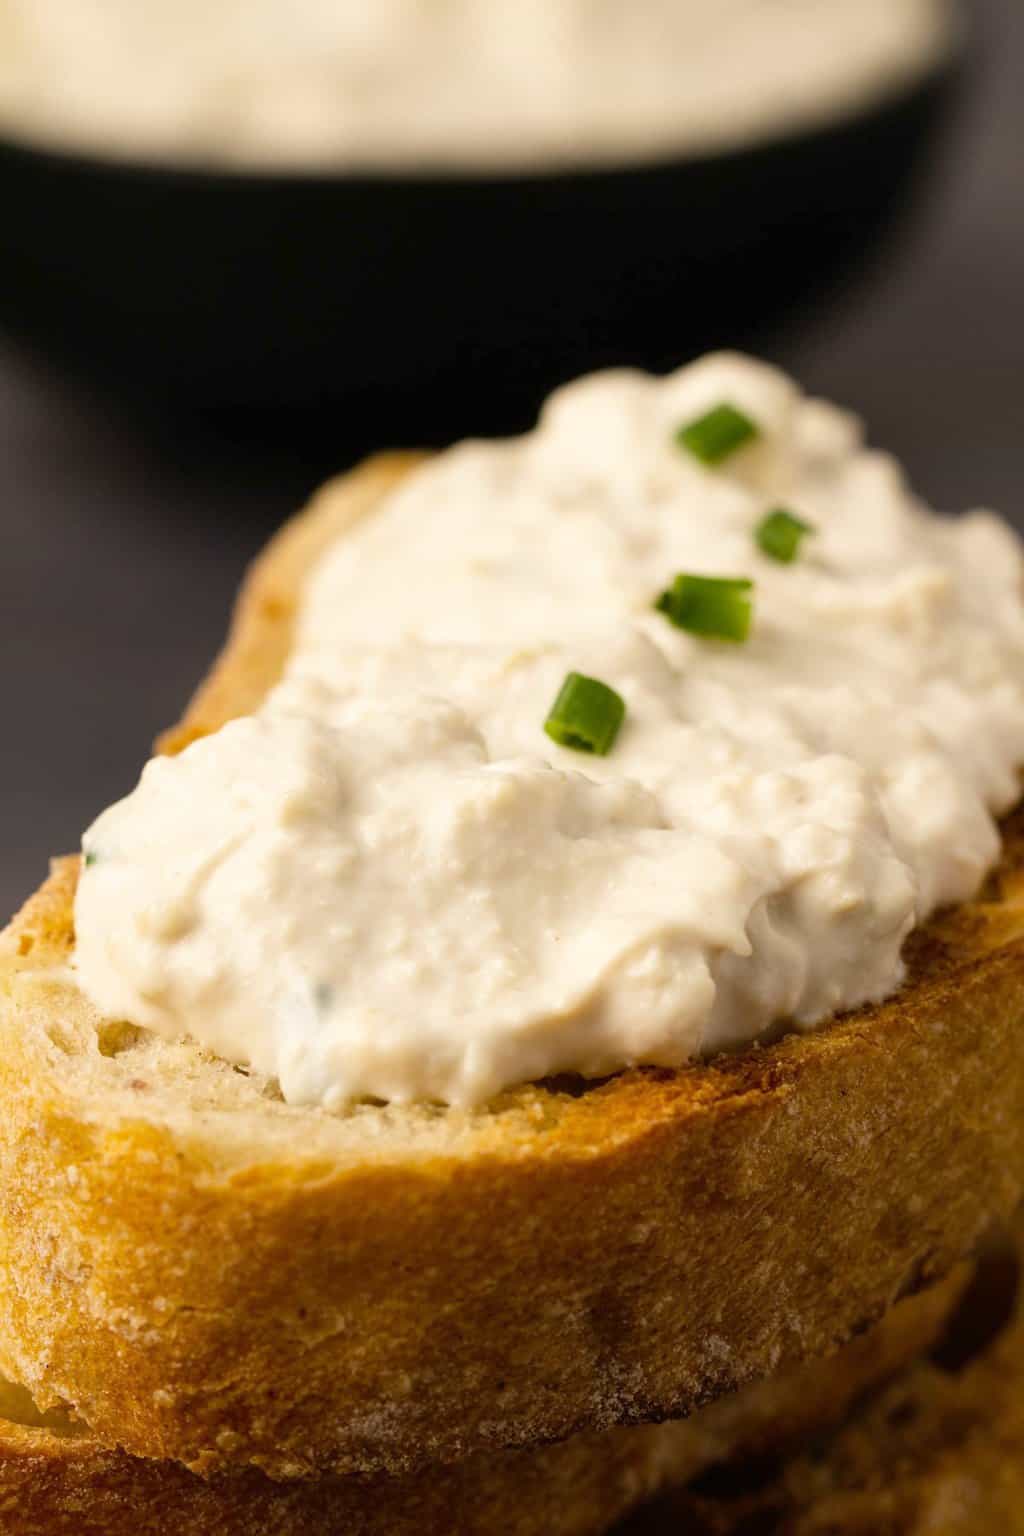 Vegan cottage cheese thickly spread on toasted ciabatta.